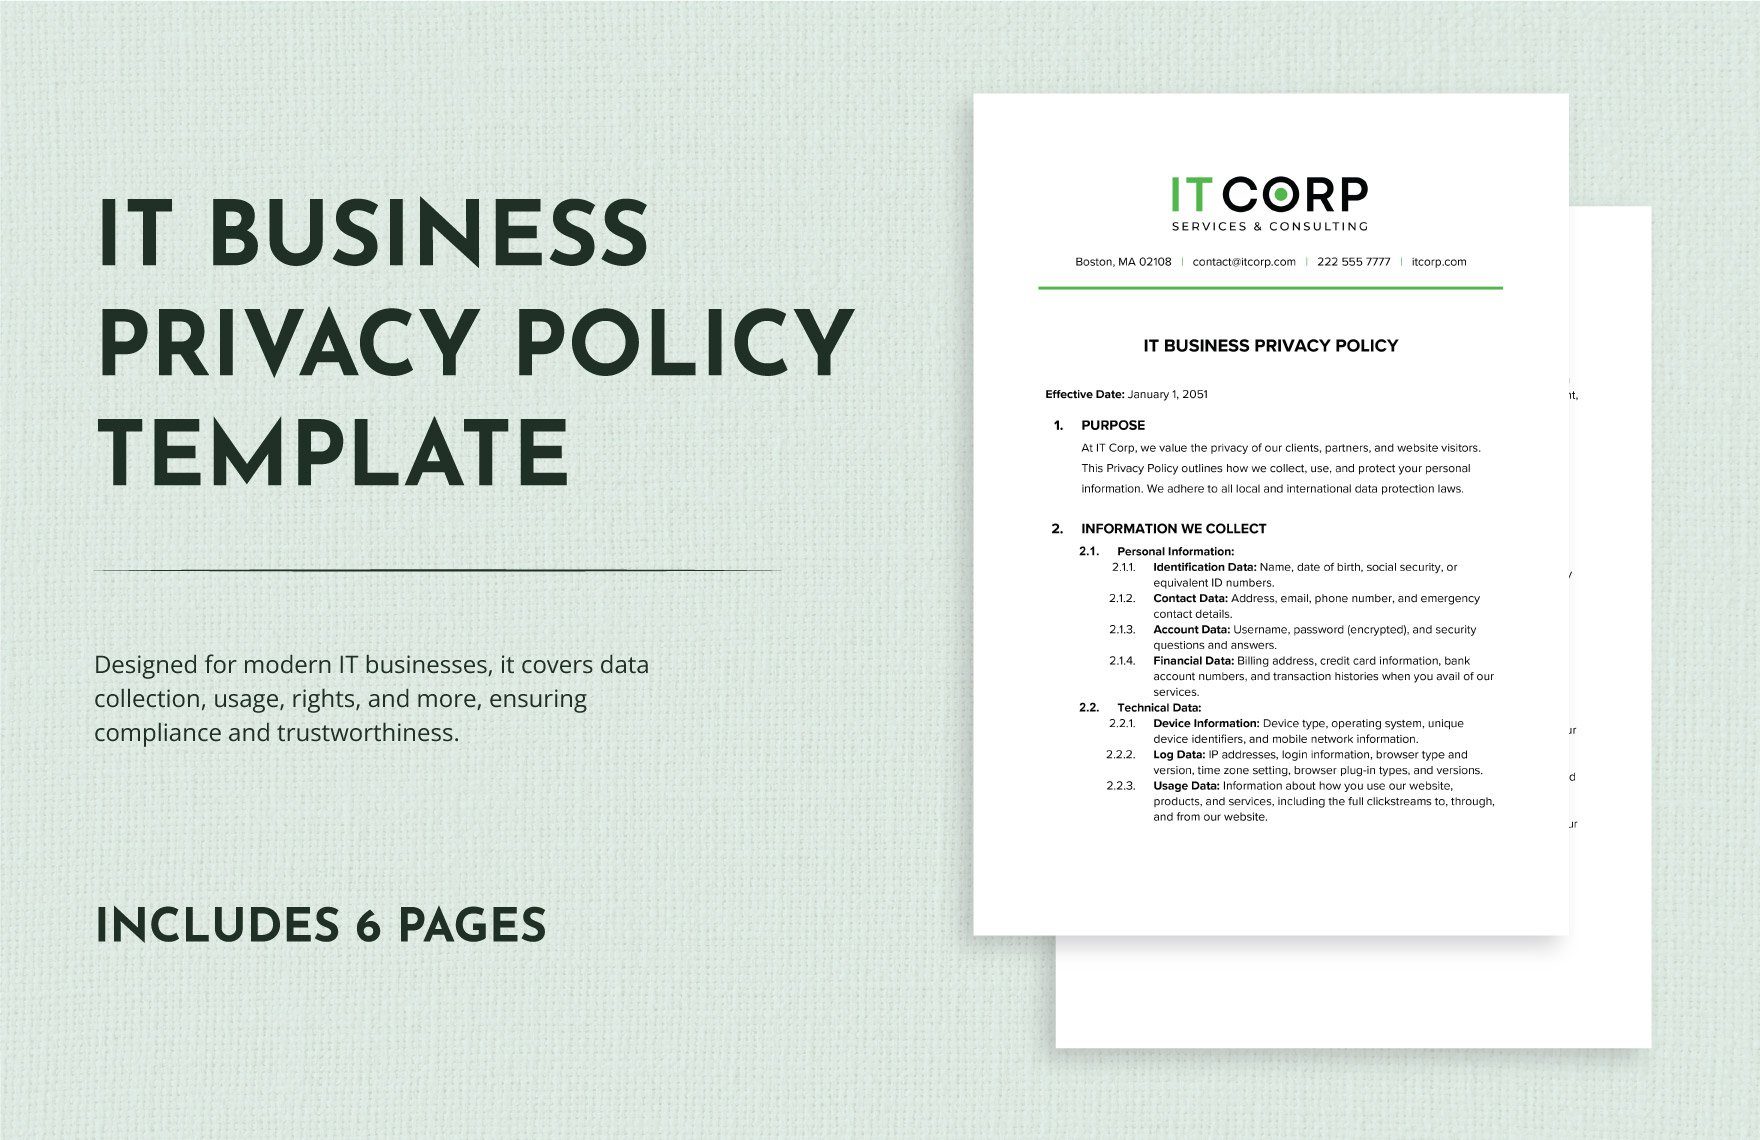 IT Business Privacy Policy Template in Word, Google Docs, PDF